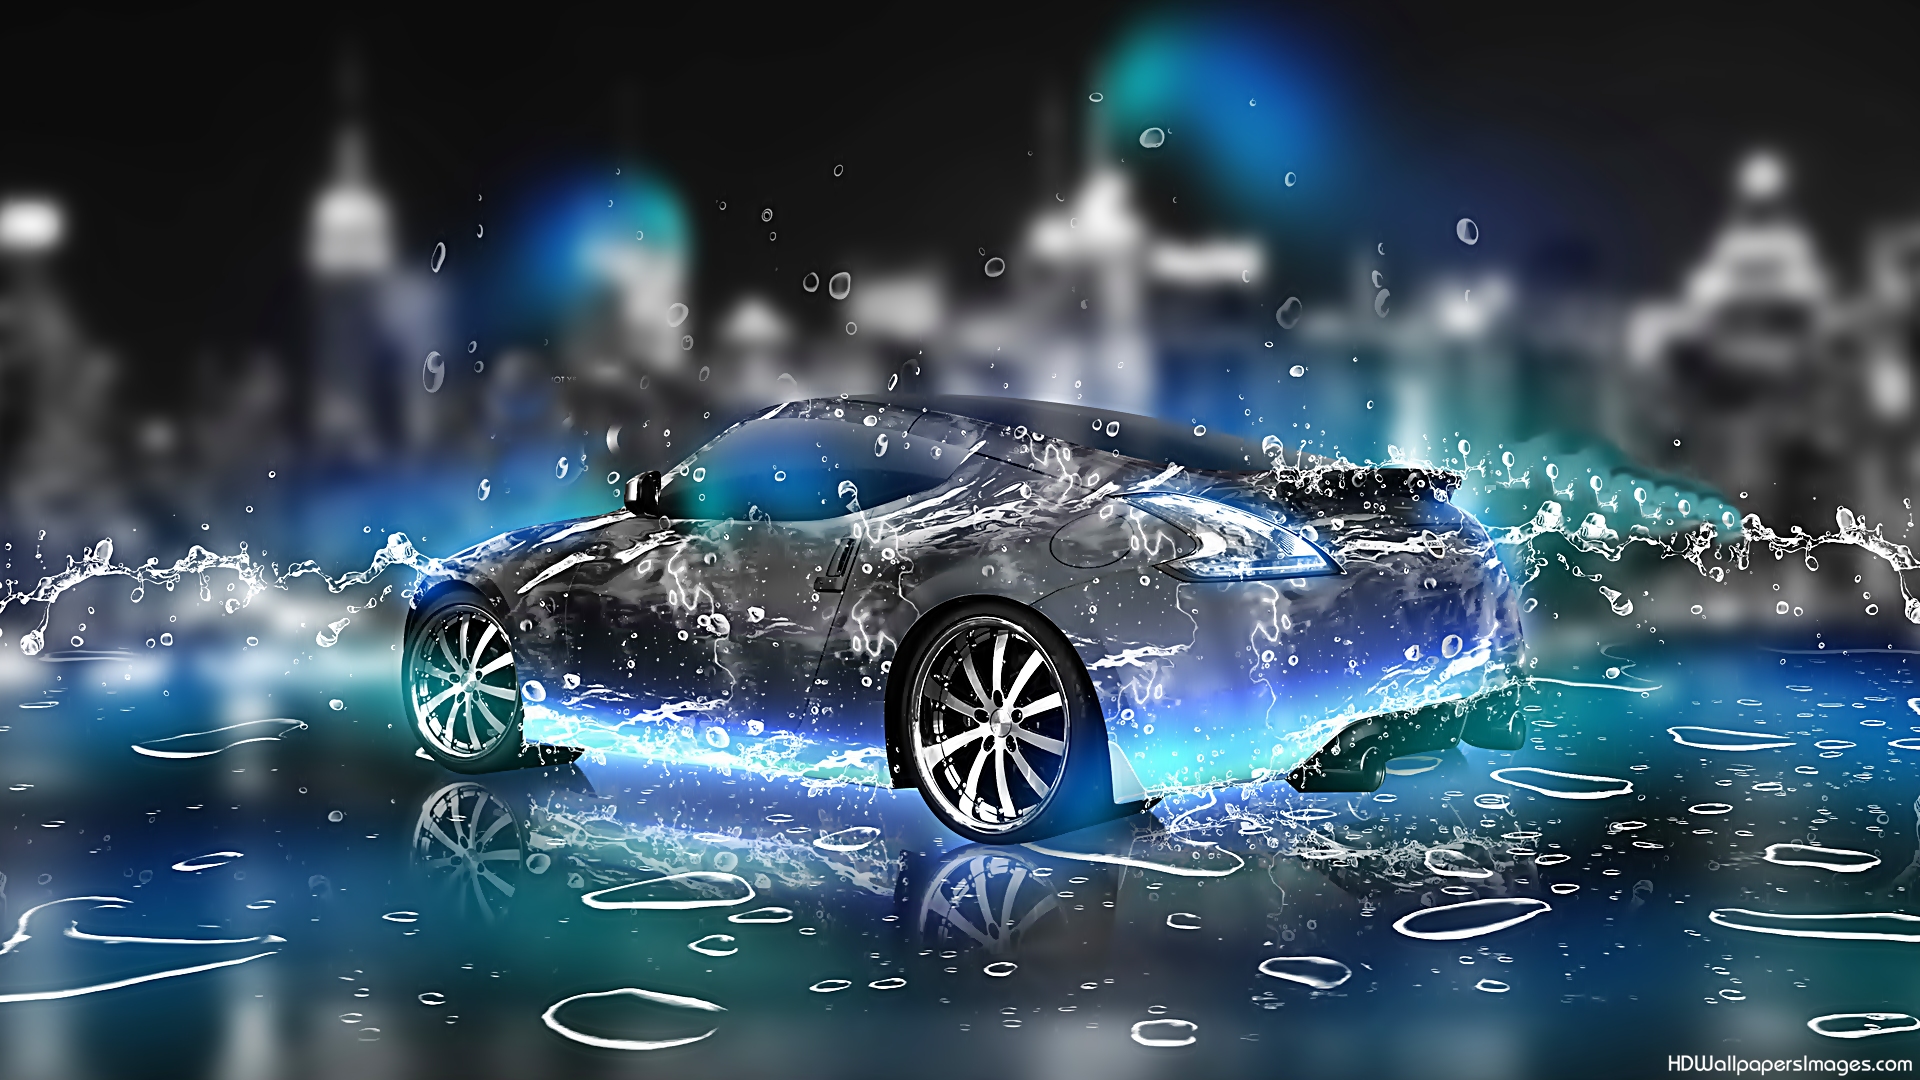 Cool Blue Cars Wallpapers